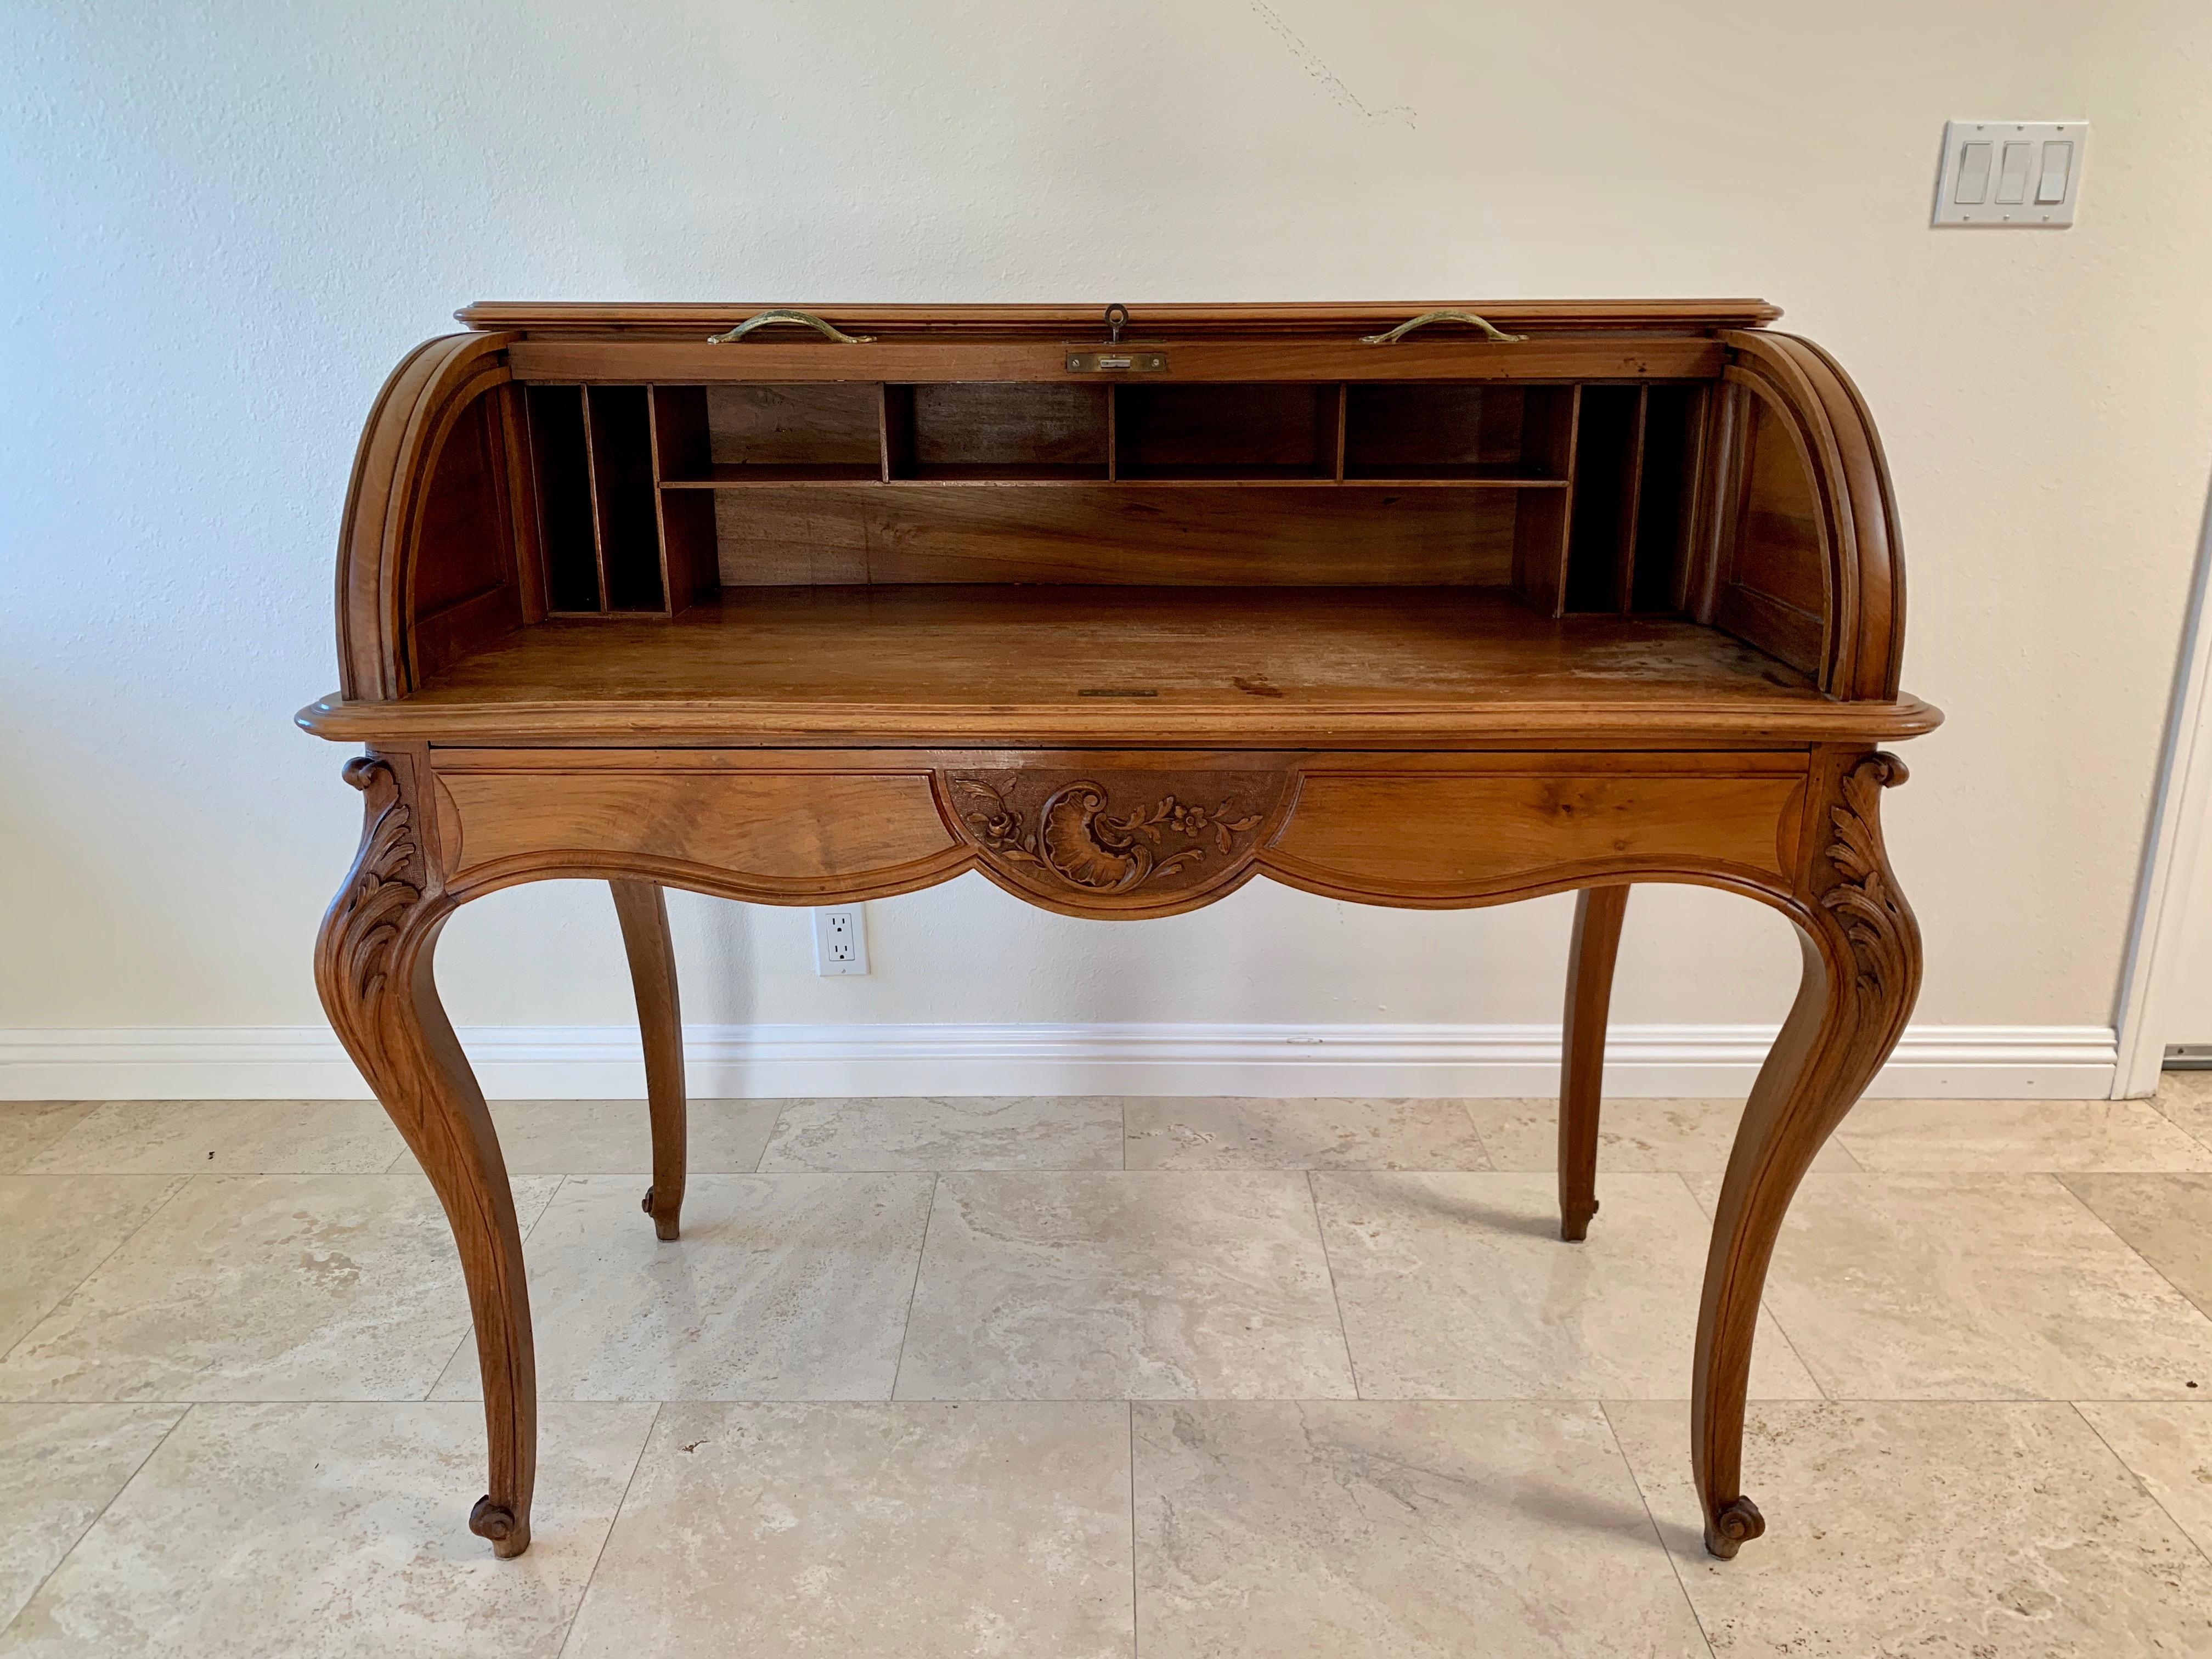 Rare 19th century French walnut roll top desk in the style of Louis XV. The tambour door locks with a key. Also finished on the back so it can be floated in the middle of a room. Desk height is 30.25